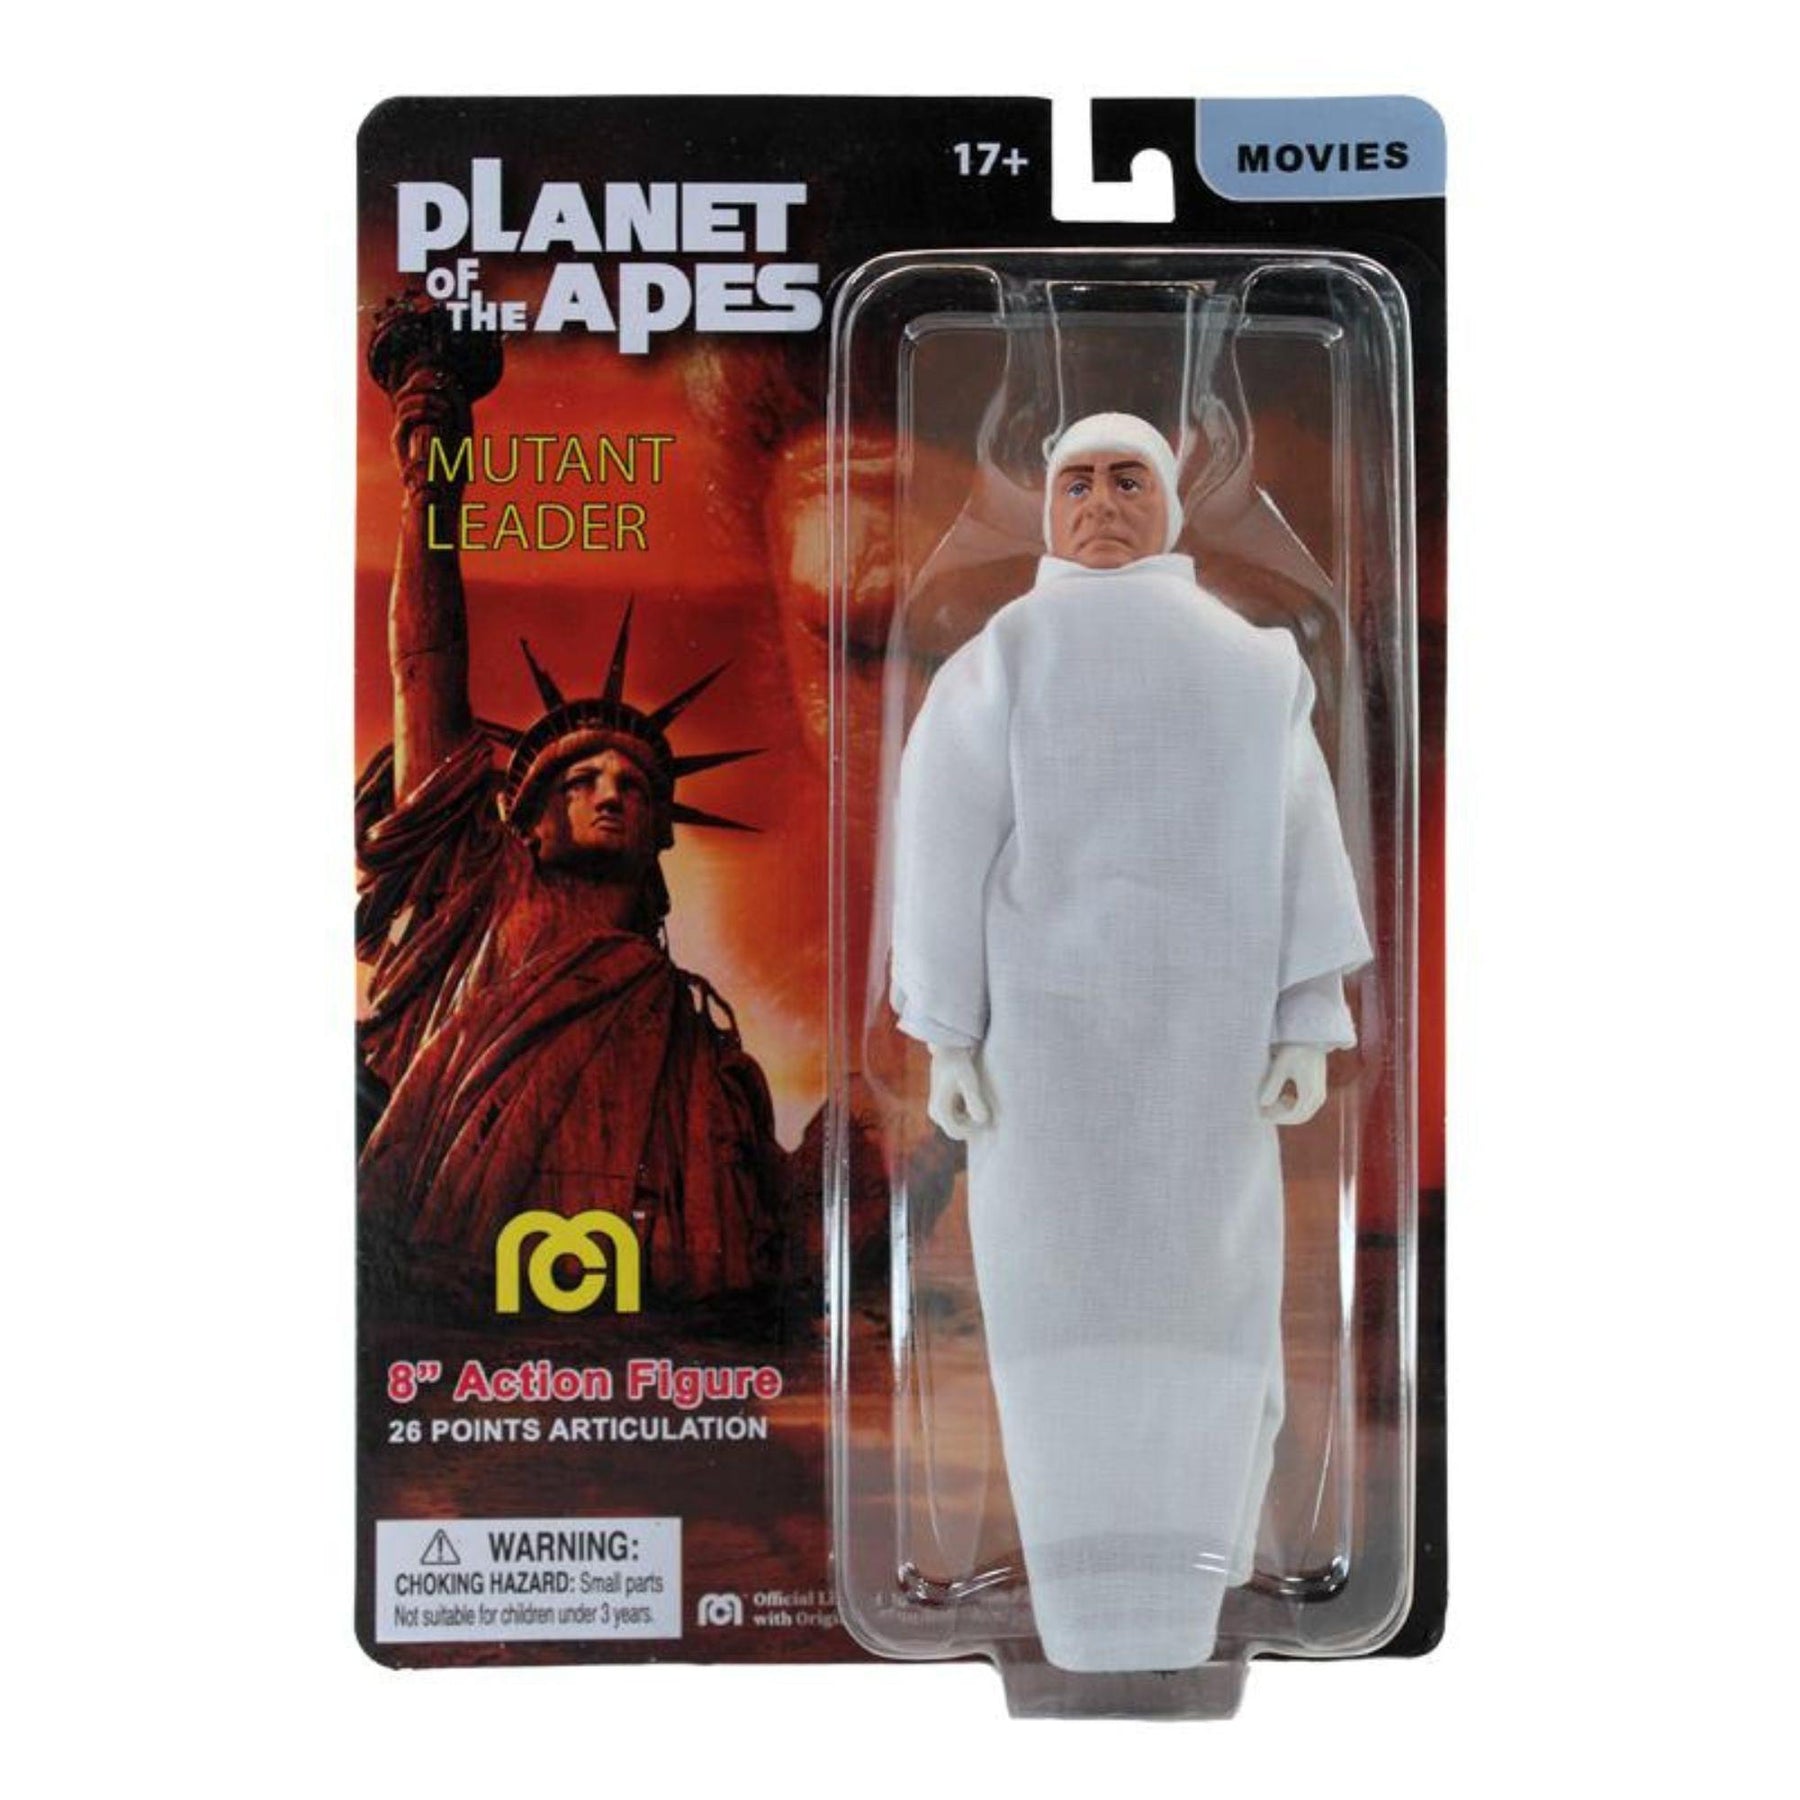 Mego Planet of the Apes Mutant Leader 8 Inch Action Figure